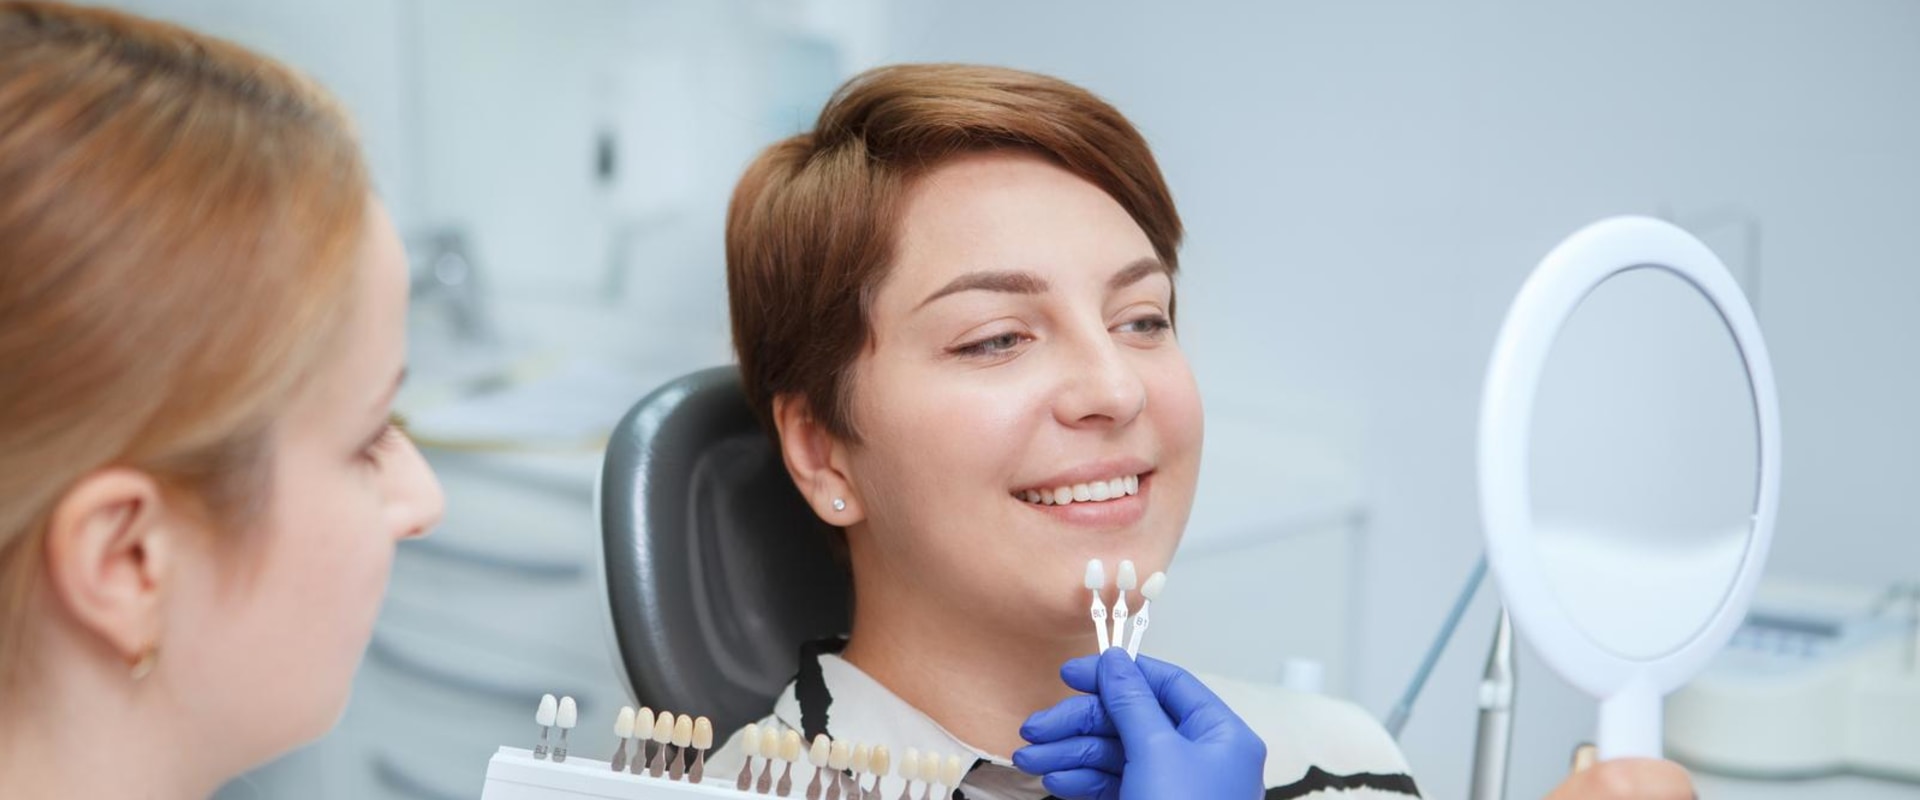 The Benefits Of Choosing A Cosmetic Dentist For Your Smile Makeover In Rockville, MD